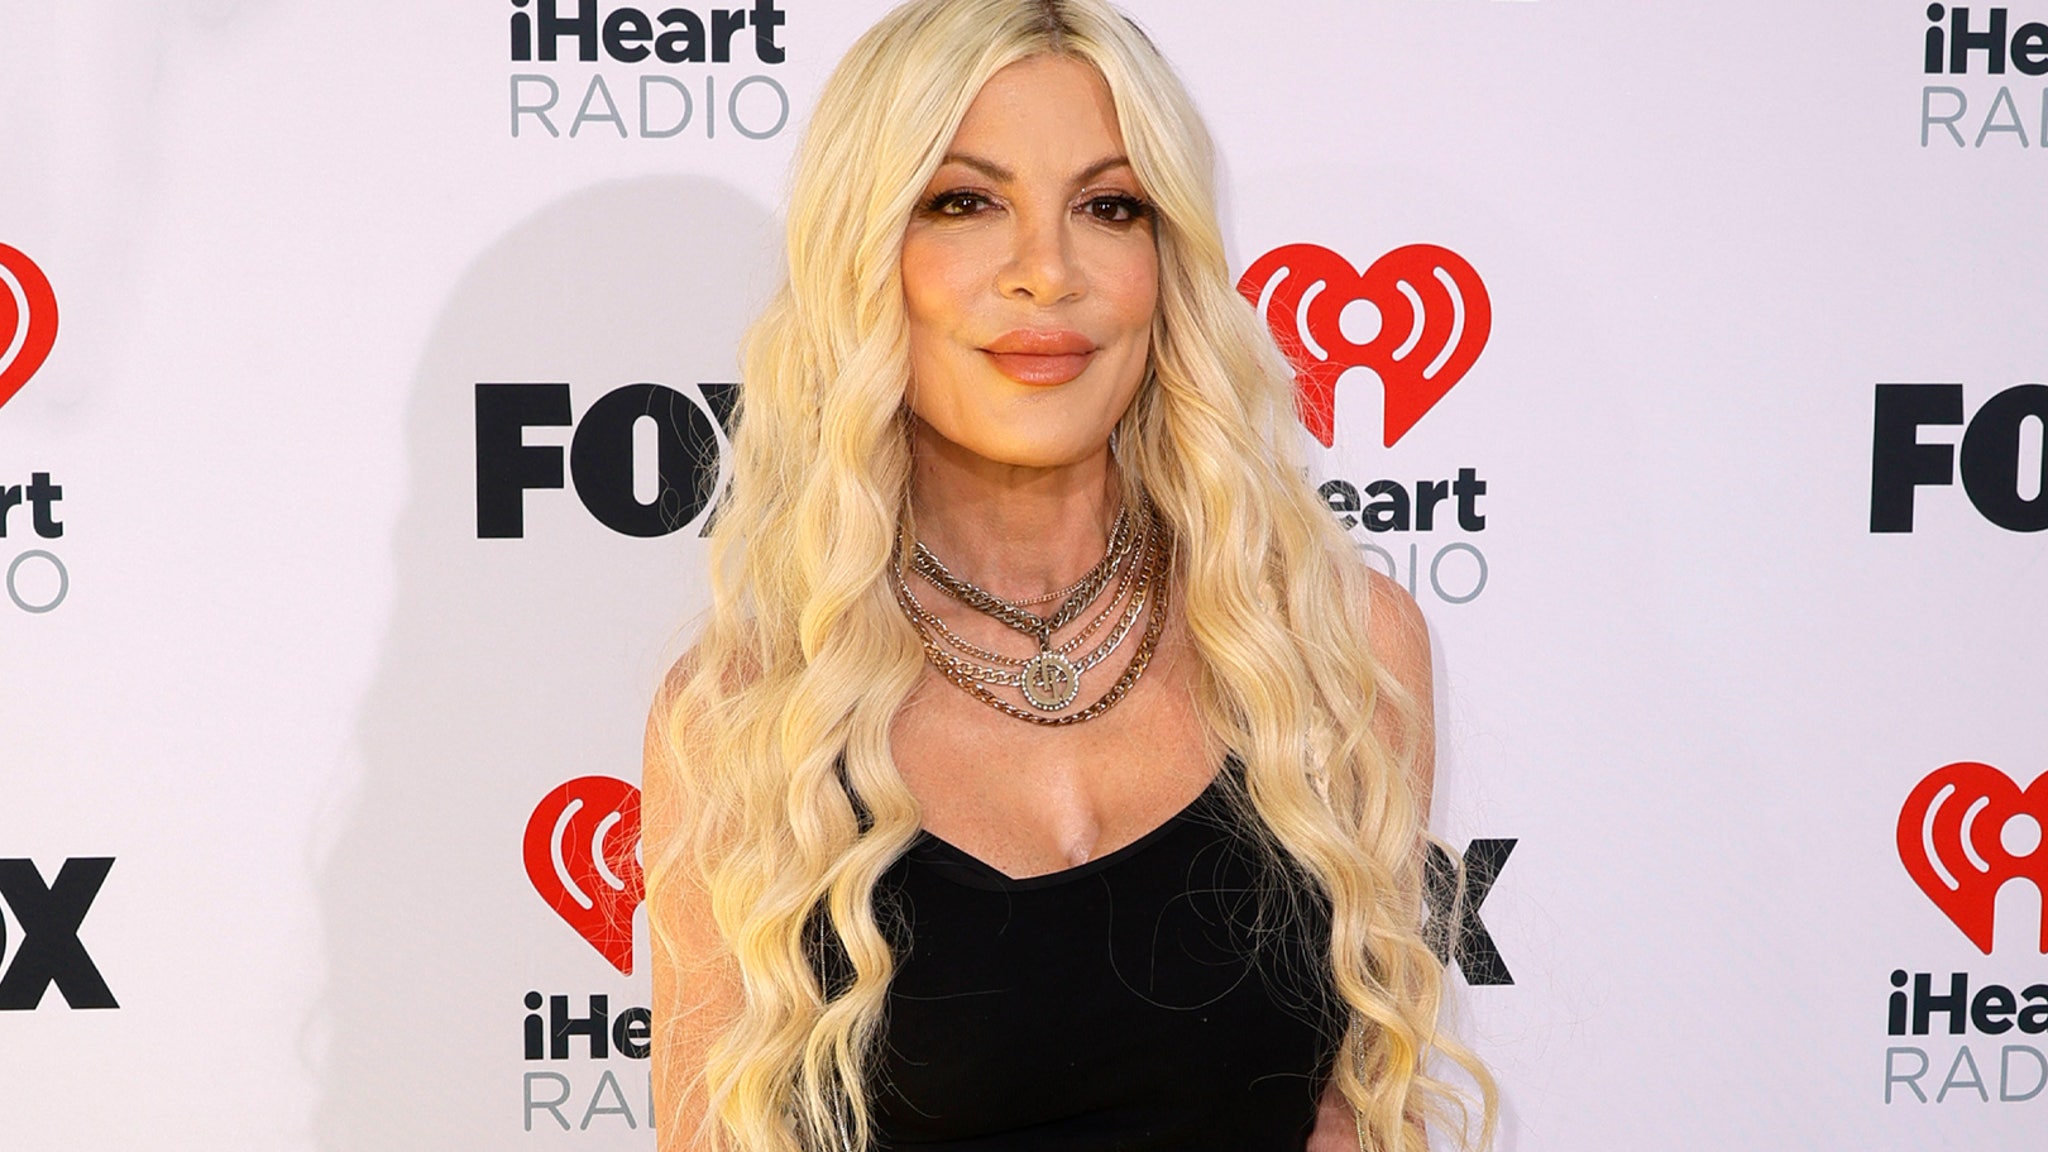 Tori Spelling Reveals She Had Estate Sale After $80K Bill for 50 Storage Units